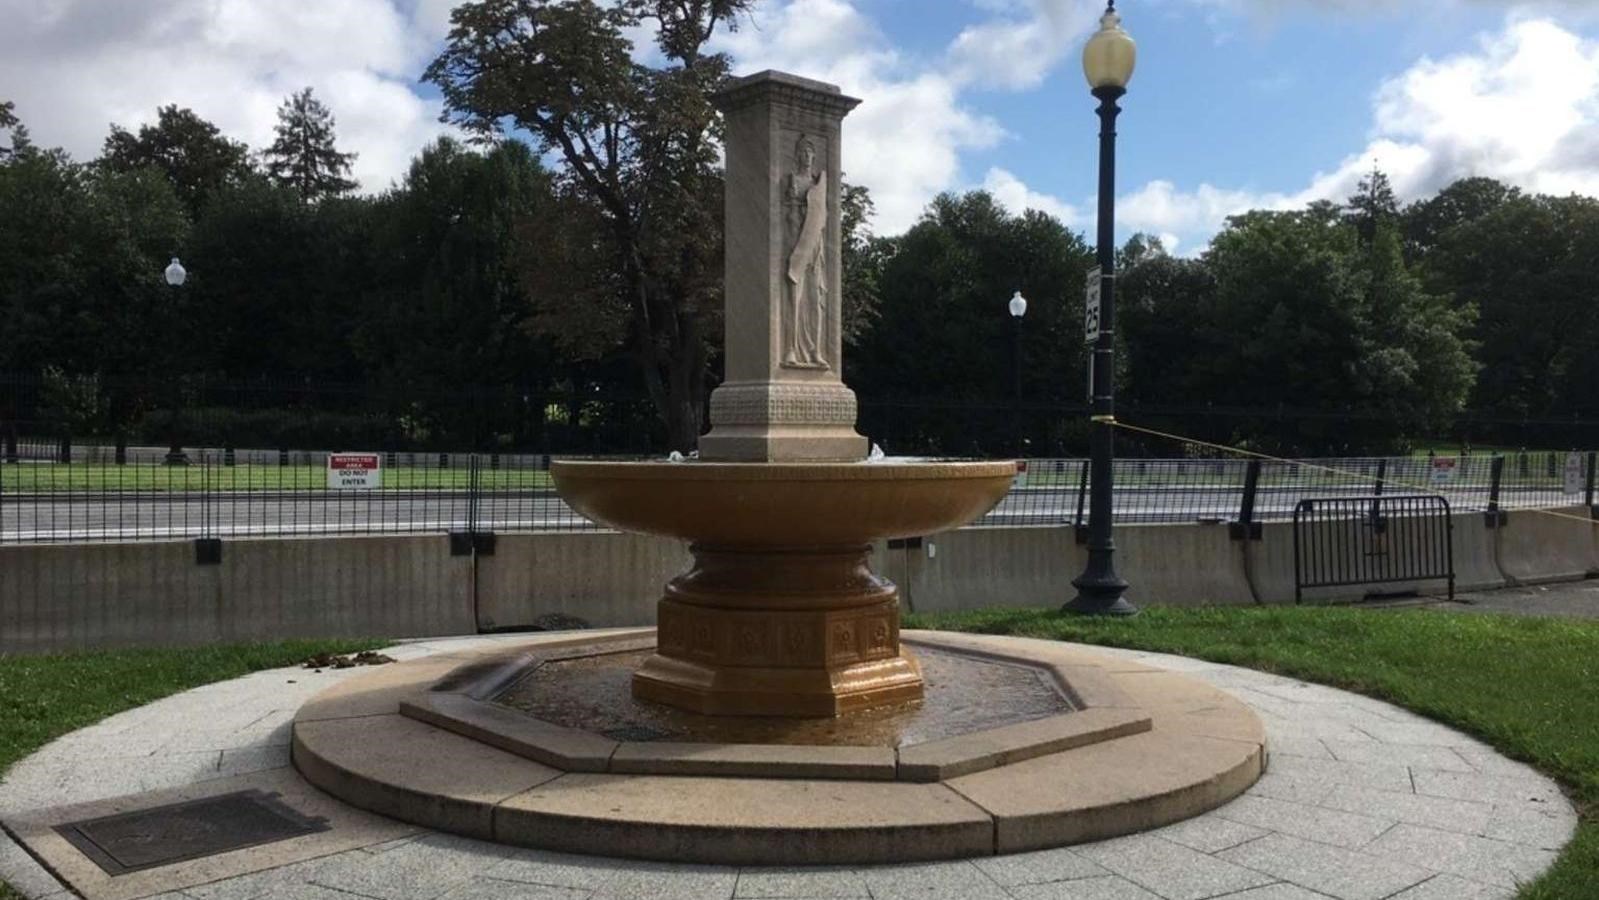 A circular fountain with a rectangular stone sculpture depicting Francis Davis Millet in the middle.